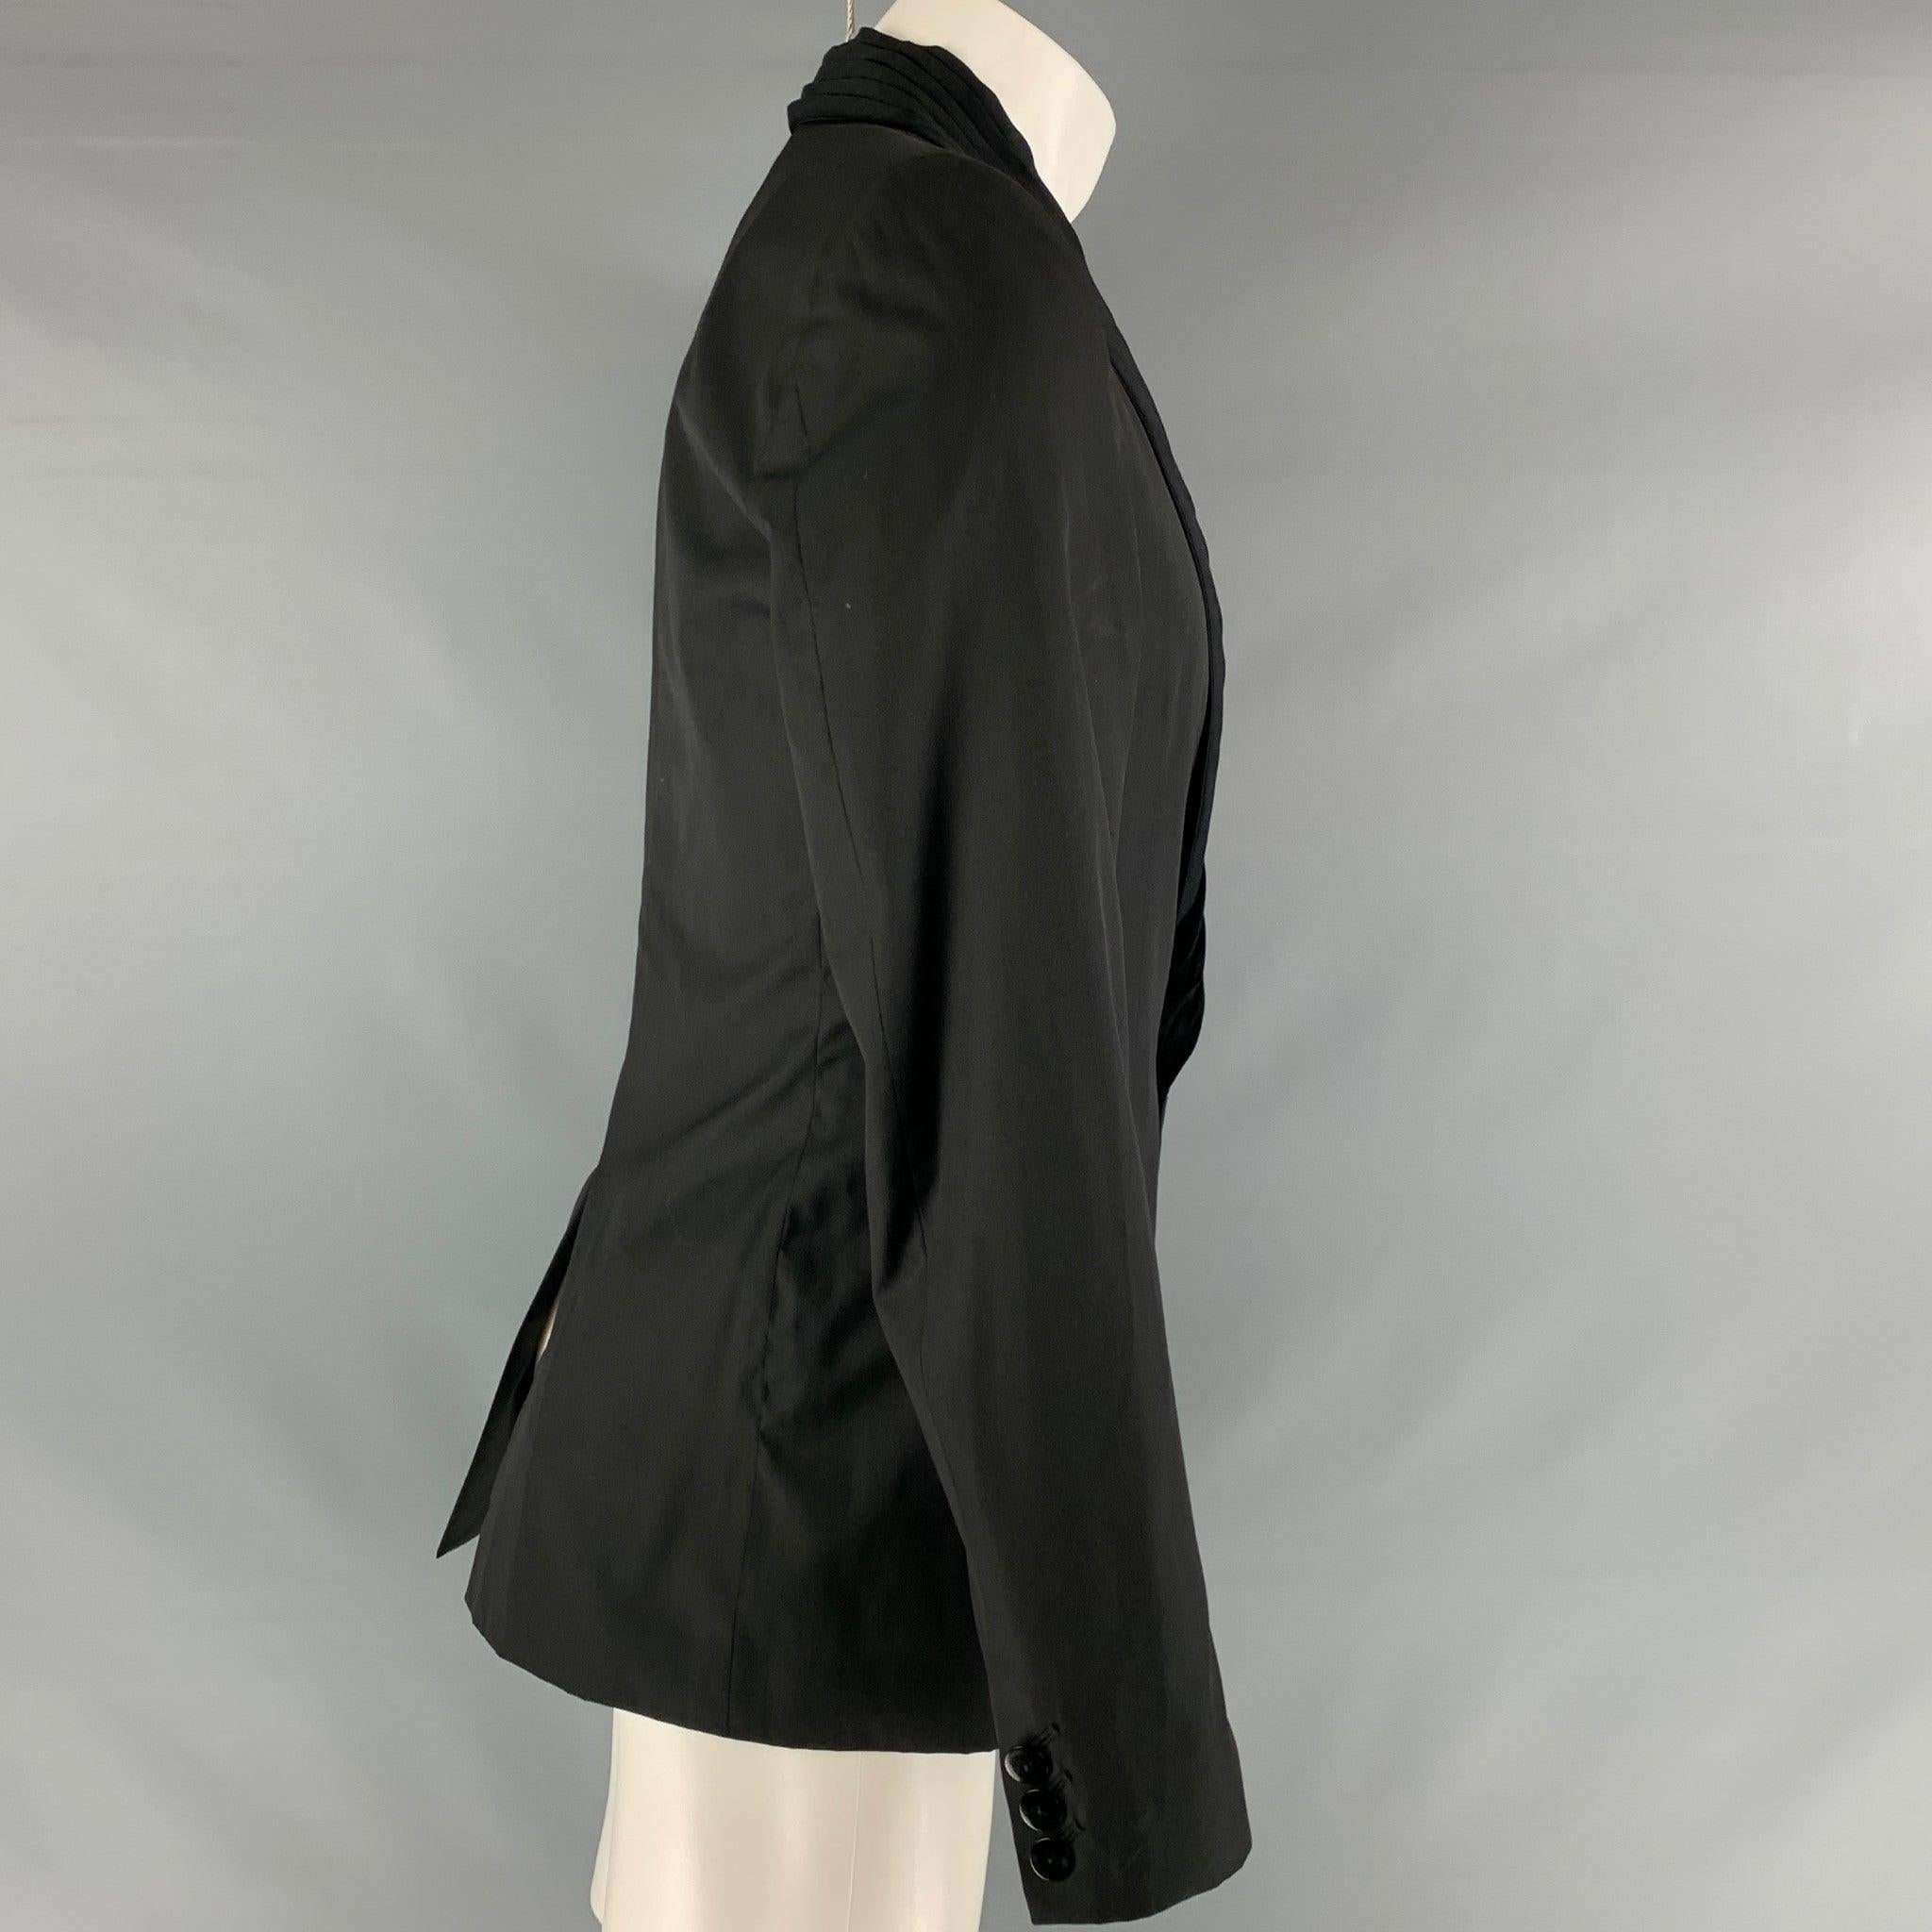 GAULTIER2 by JEAN PAUL GAULTIER sport jacket comes in black wool and silk woven material featuring a pleated lapel, single button closure, welt pockets, single back vent, and signature tab detail.
Made in Italy.Very Good Pre-Owned Condition. Minor